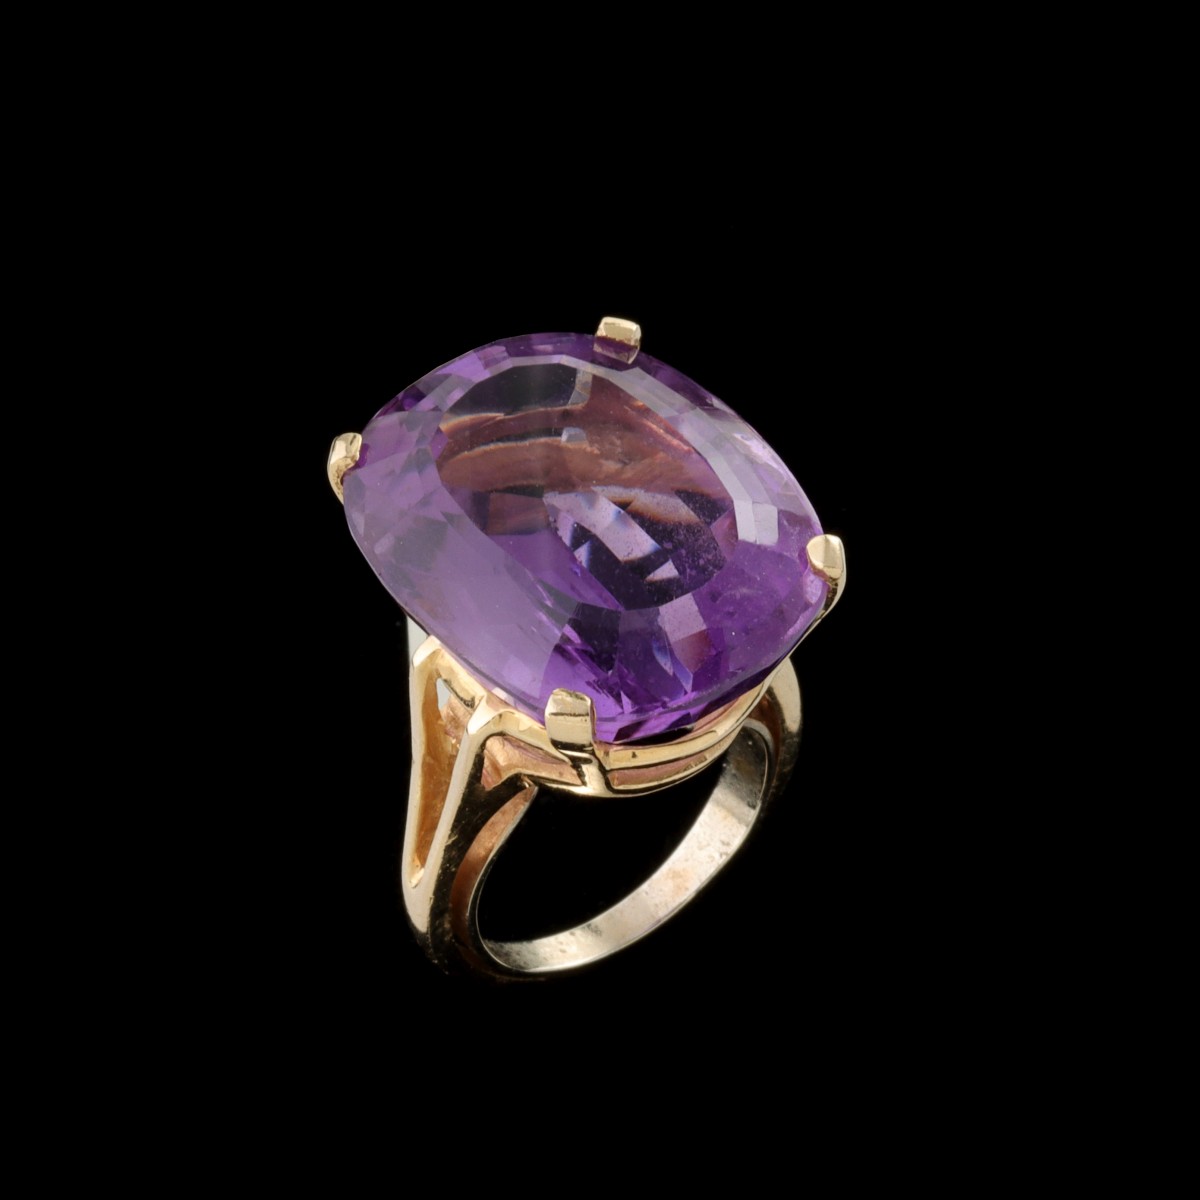 A LADIES 14K YELLOW GOLD AND OVAL AMETHYST RING